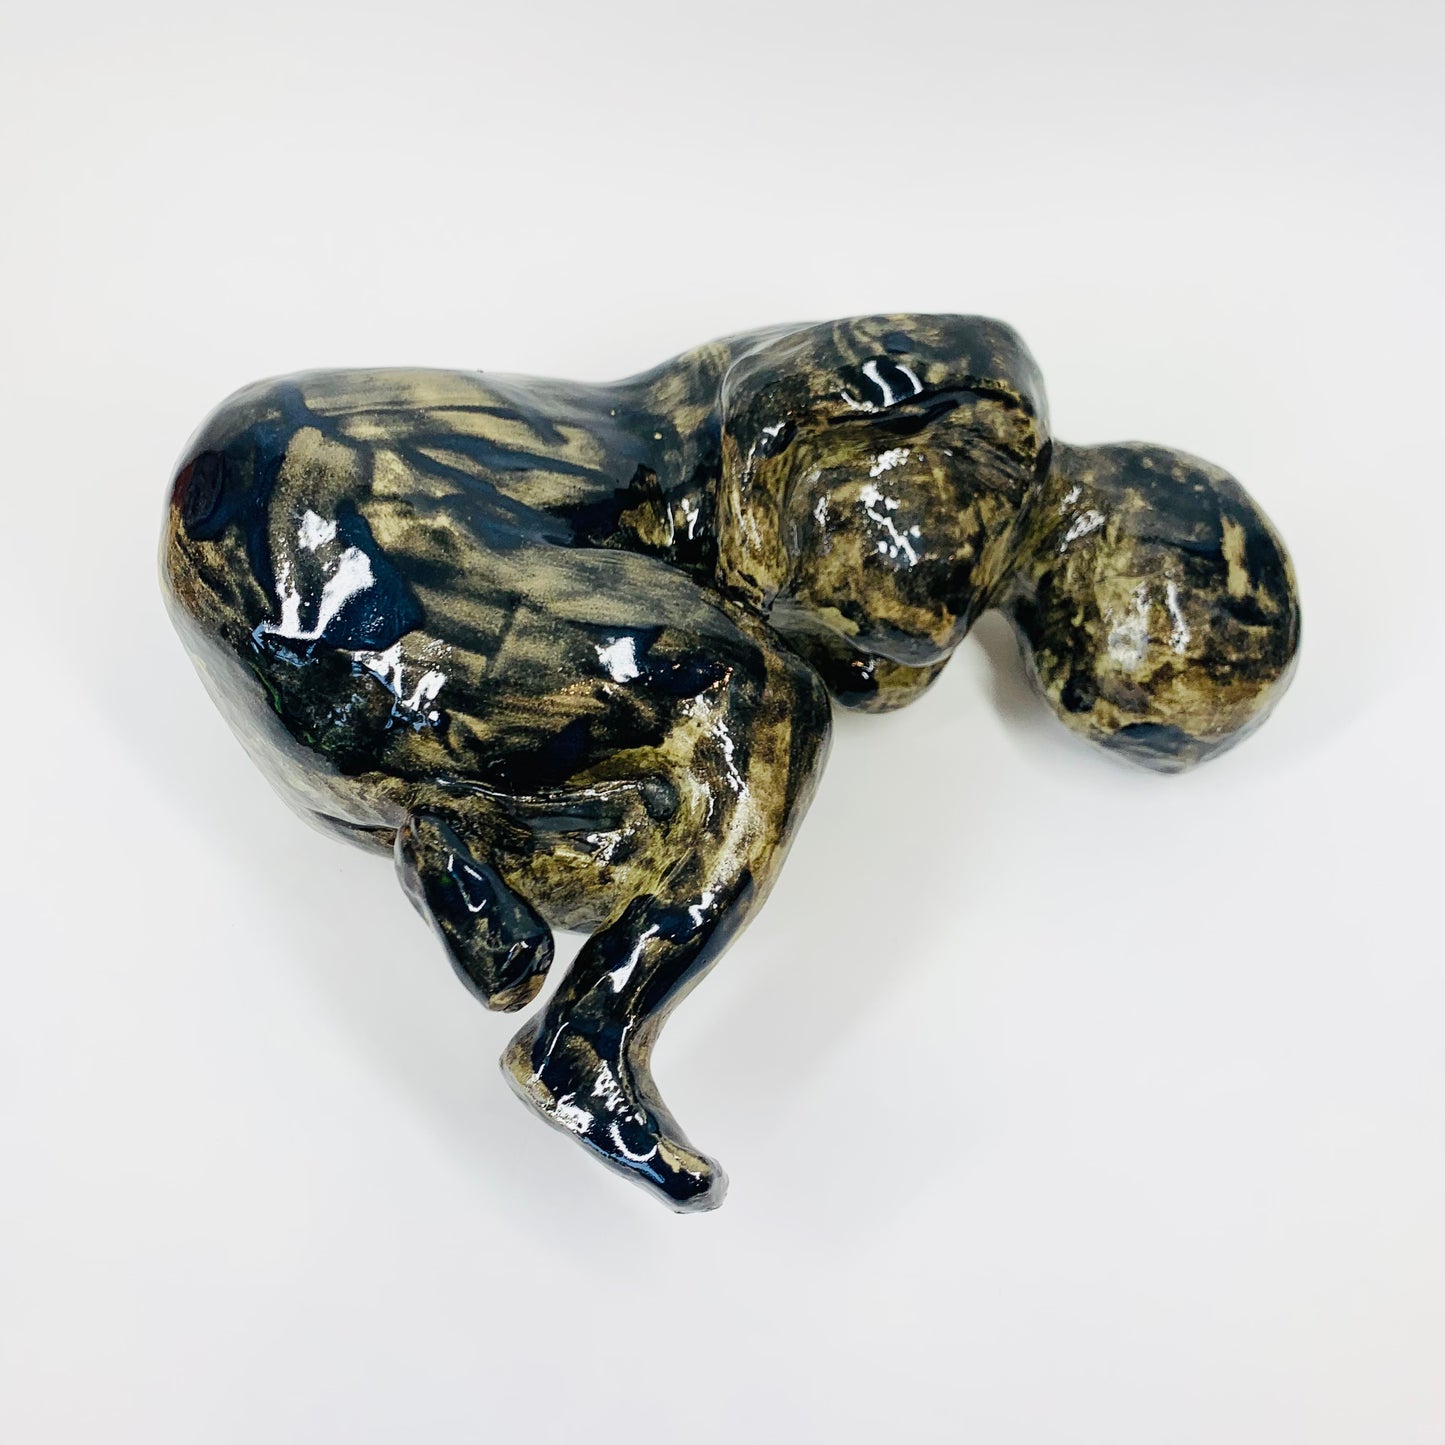 Australian pottery sculpture depicting woman clutching her stomach